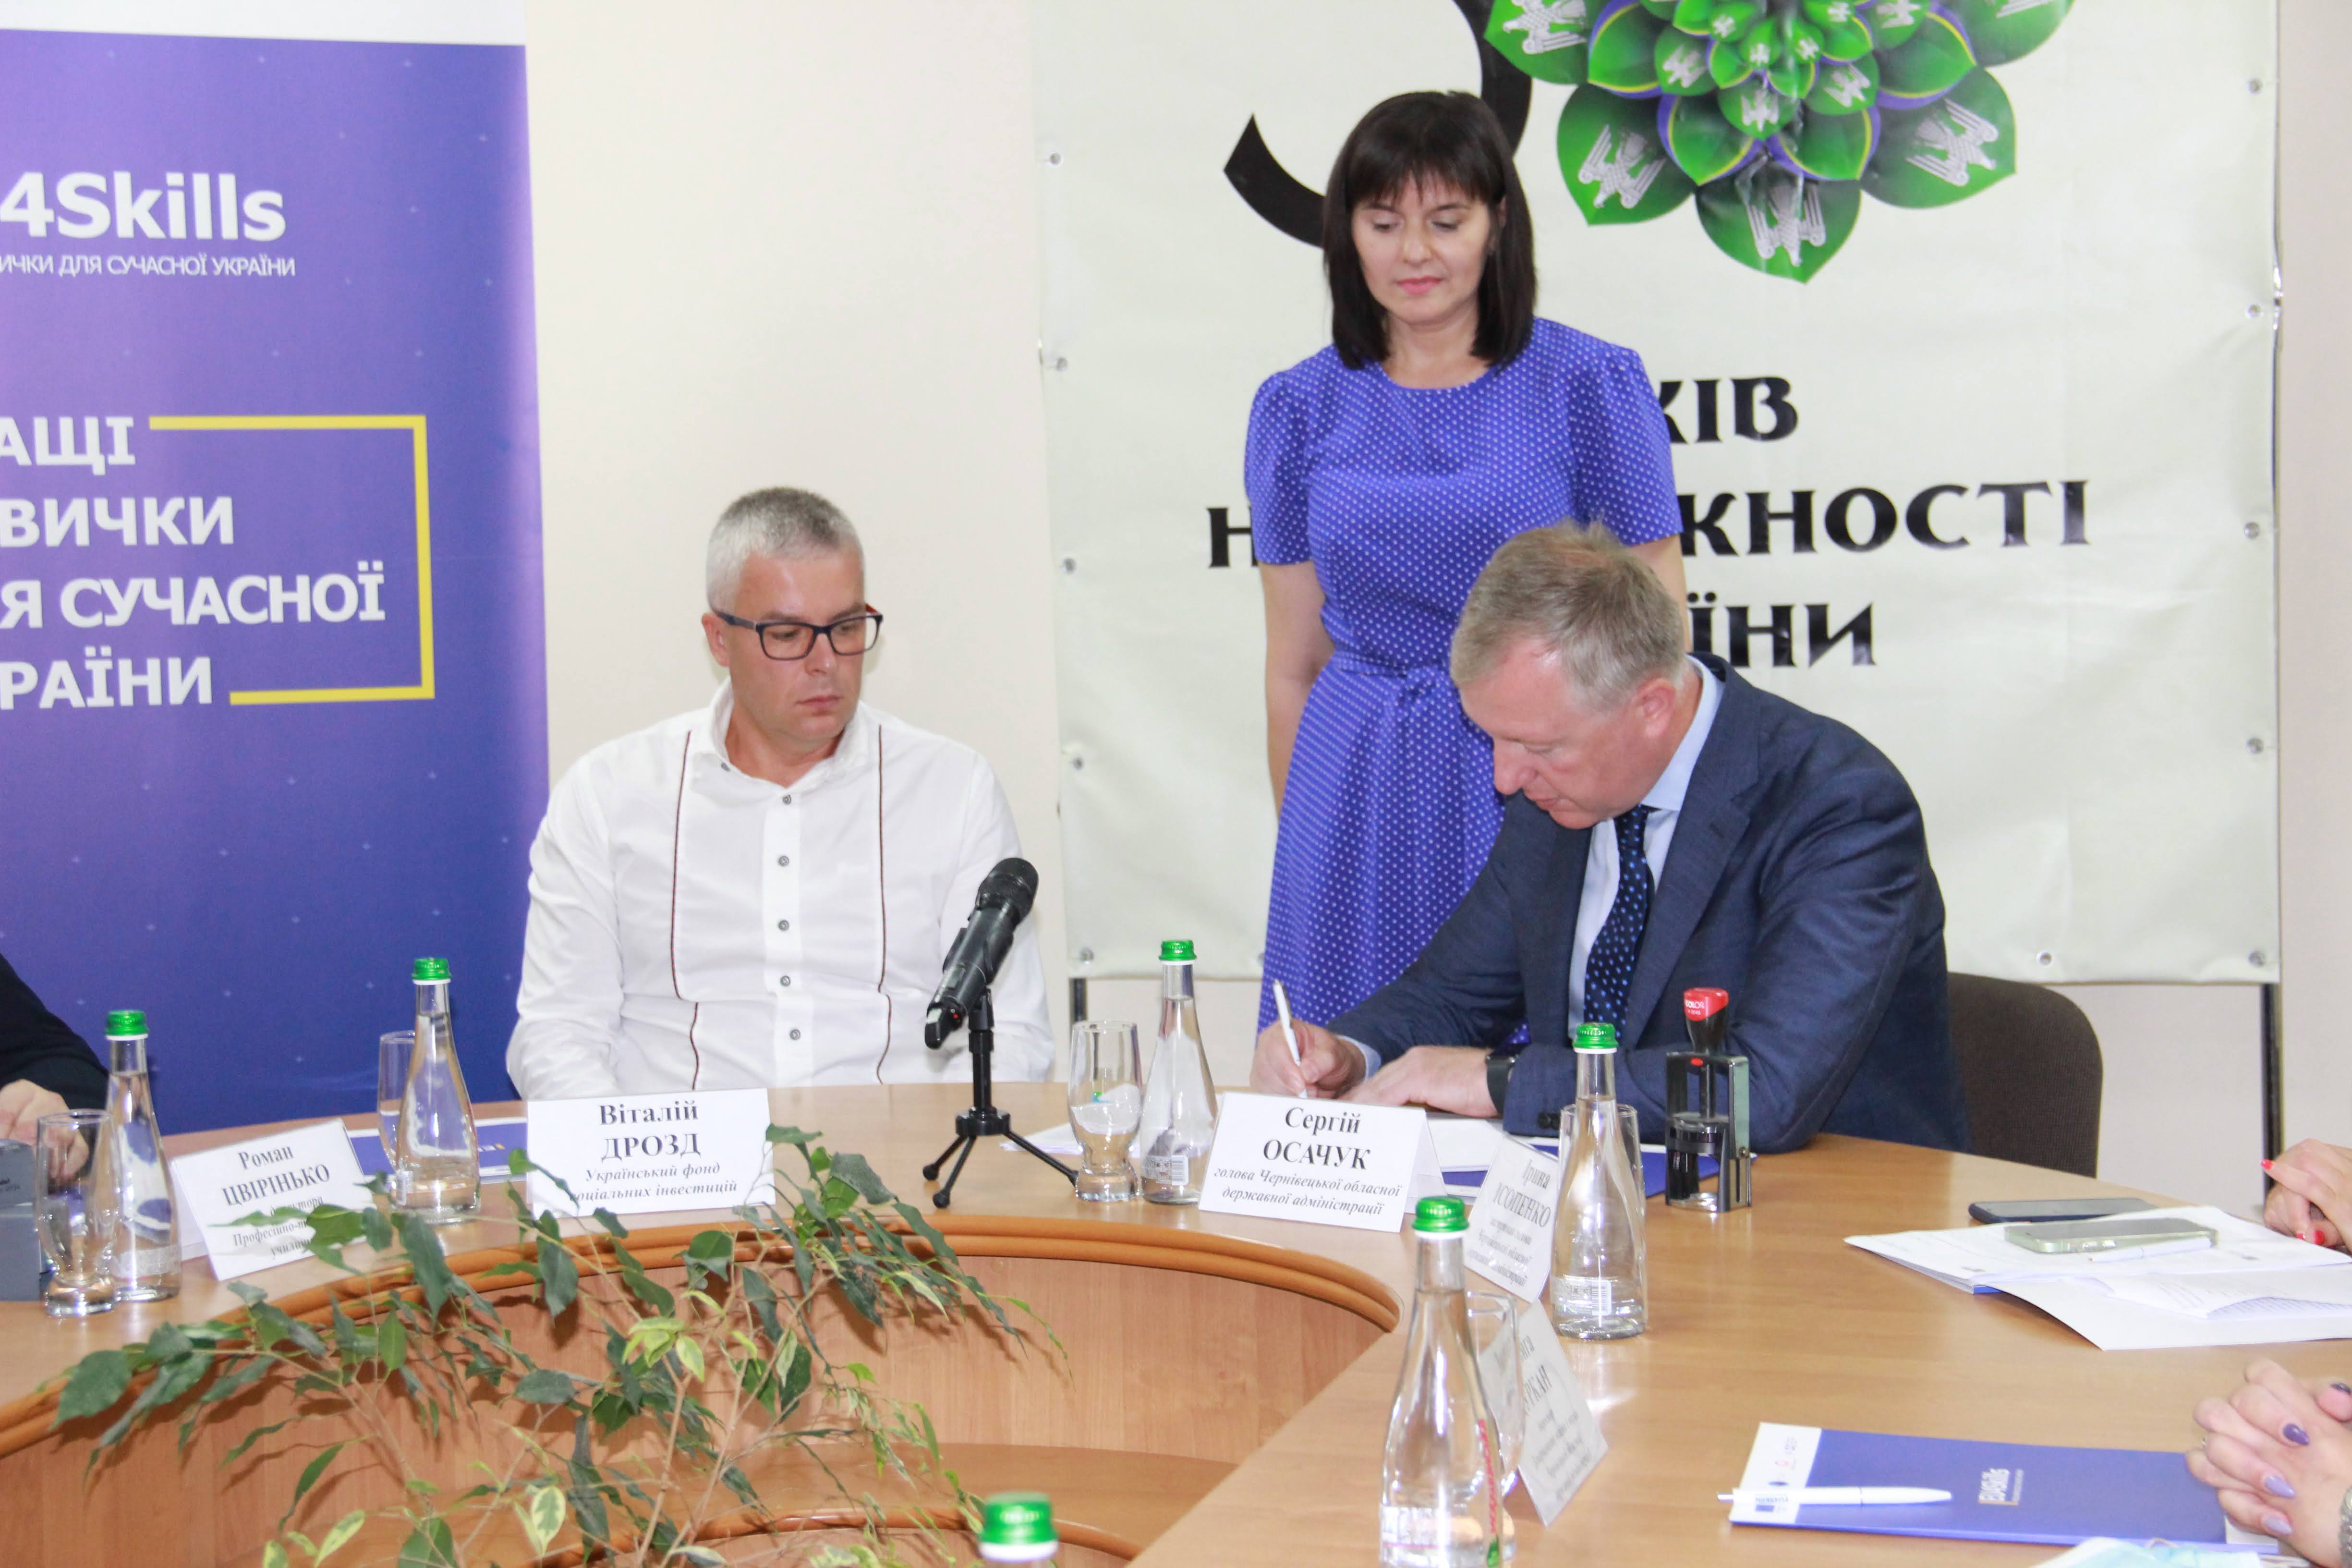 Three institutions of vocational education of Chernivtsi region to participate in EU4Skills programme